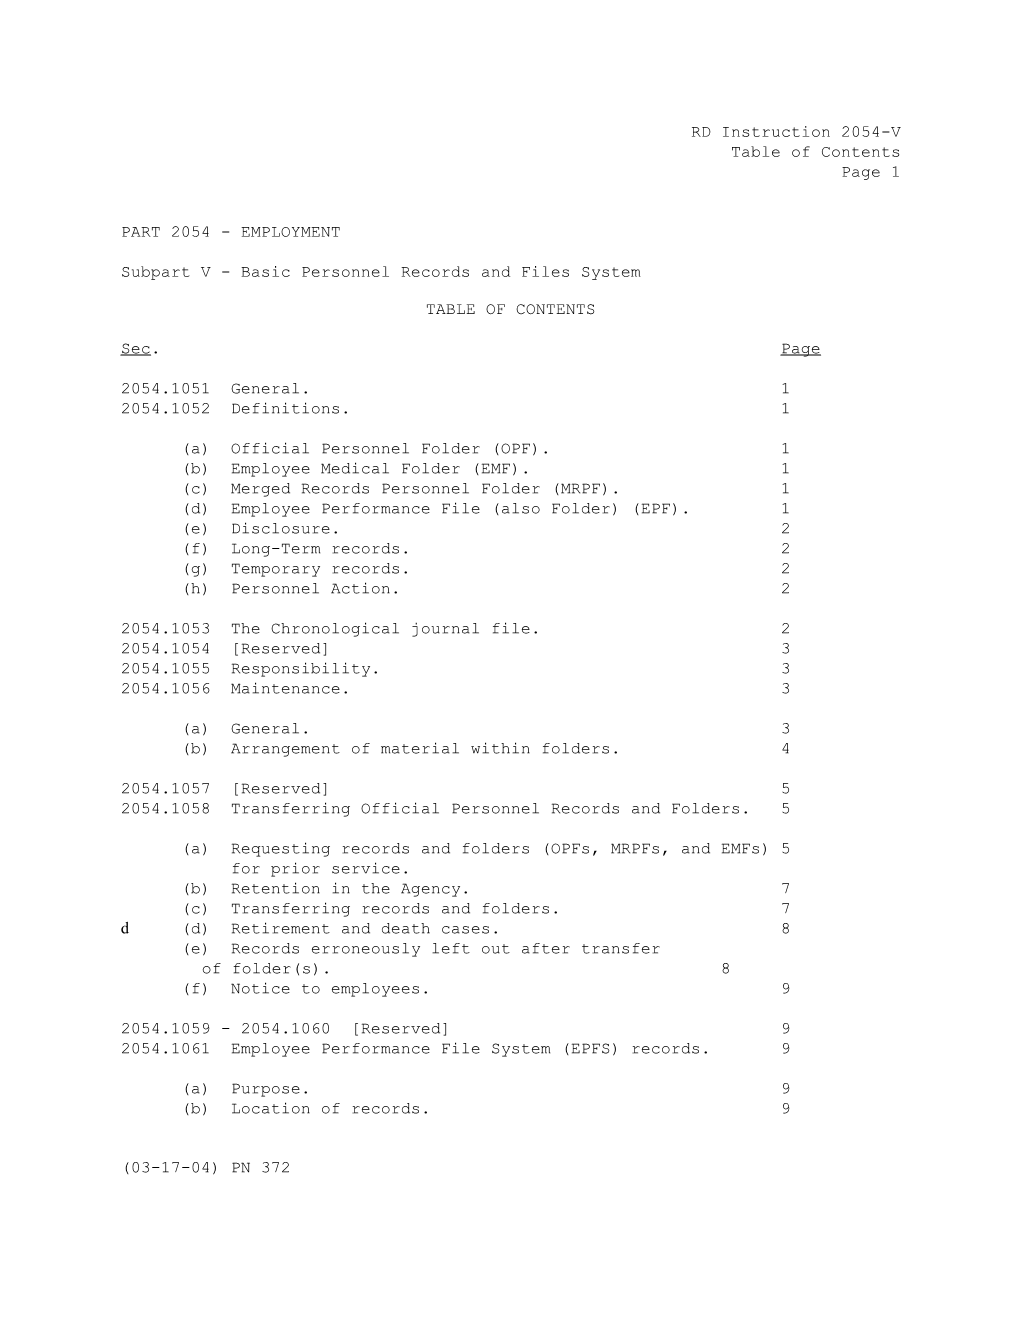 Subpart V - Basic Personnel Records and Files System